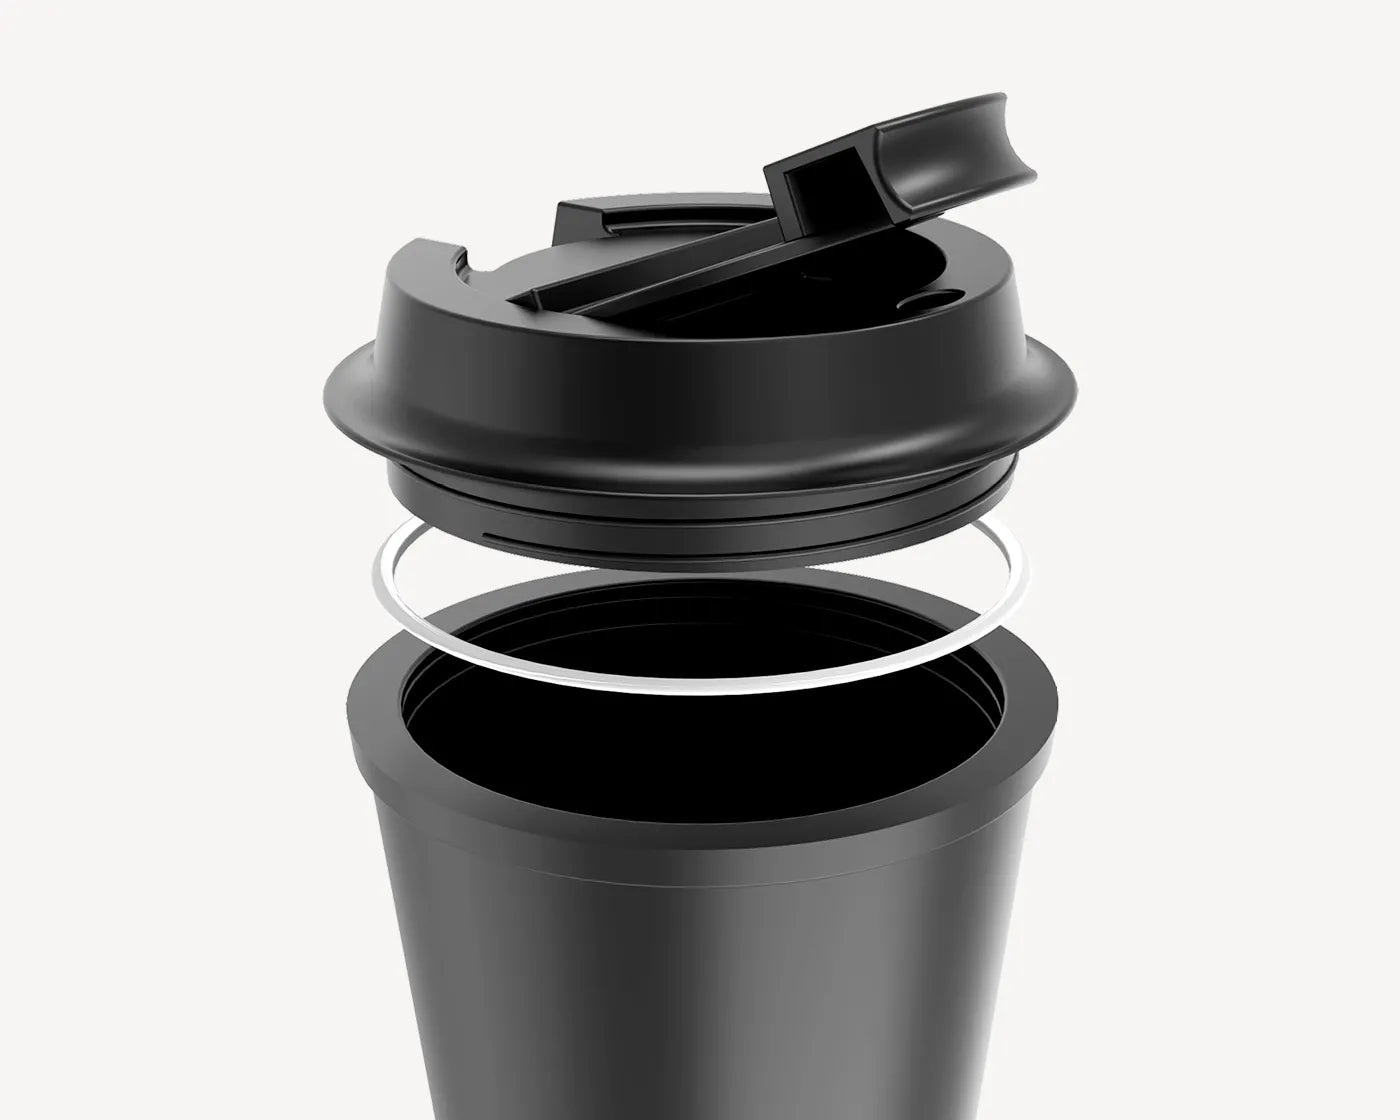 Innovative design of a matte black travel mug with open lid showcasing spill-proof feature.